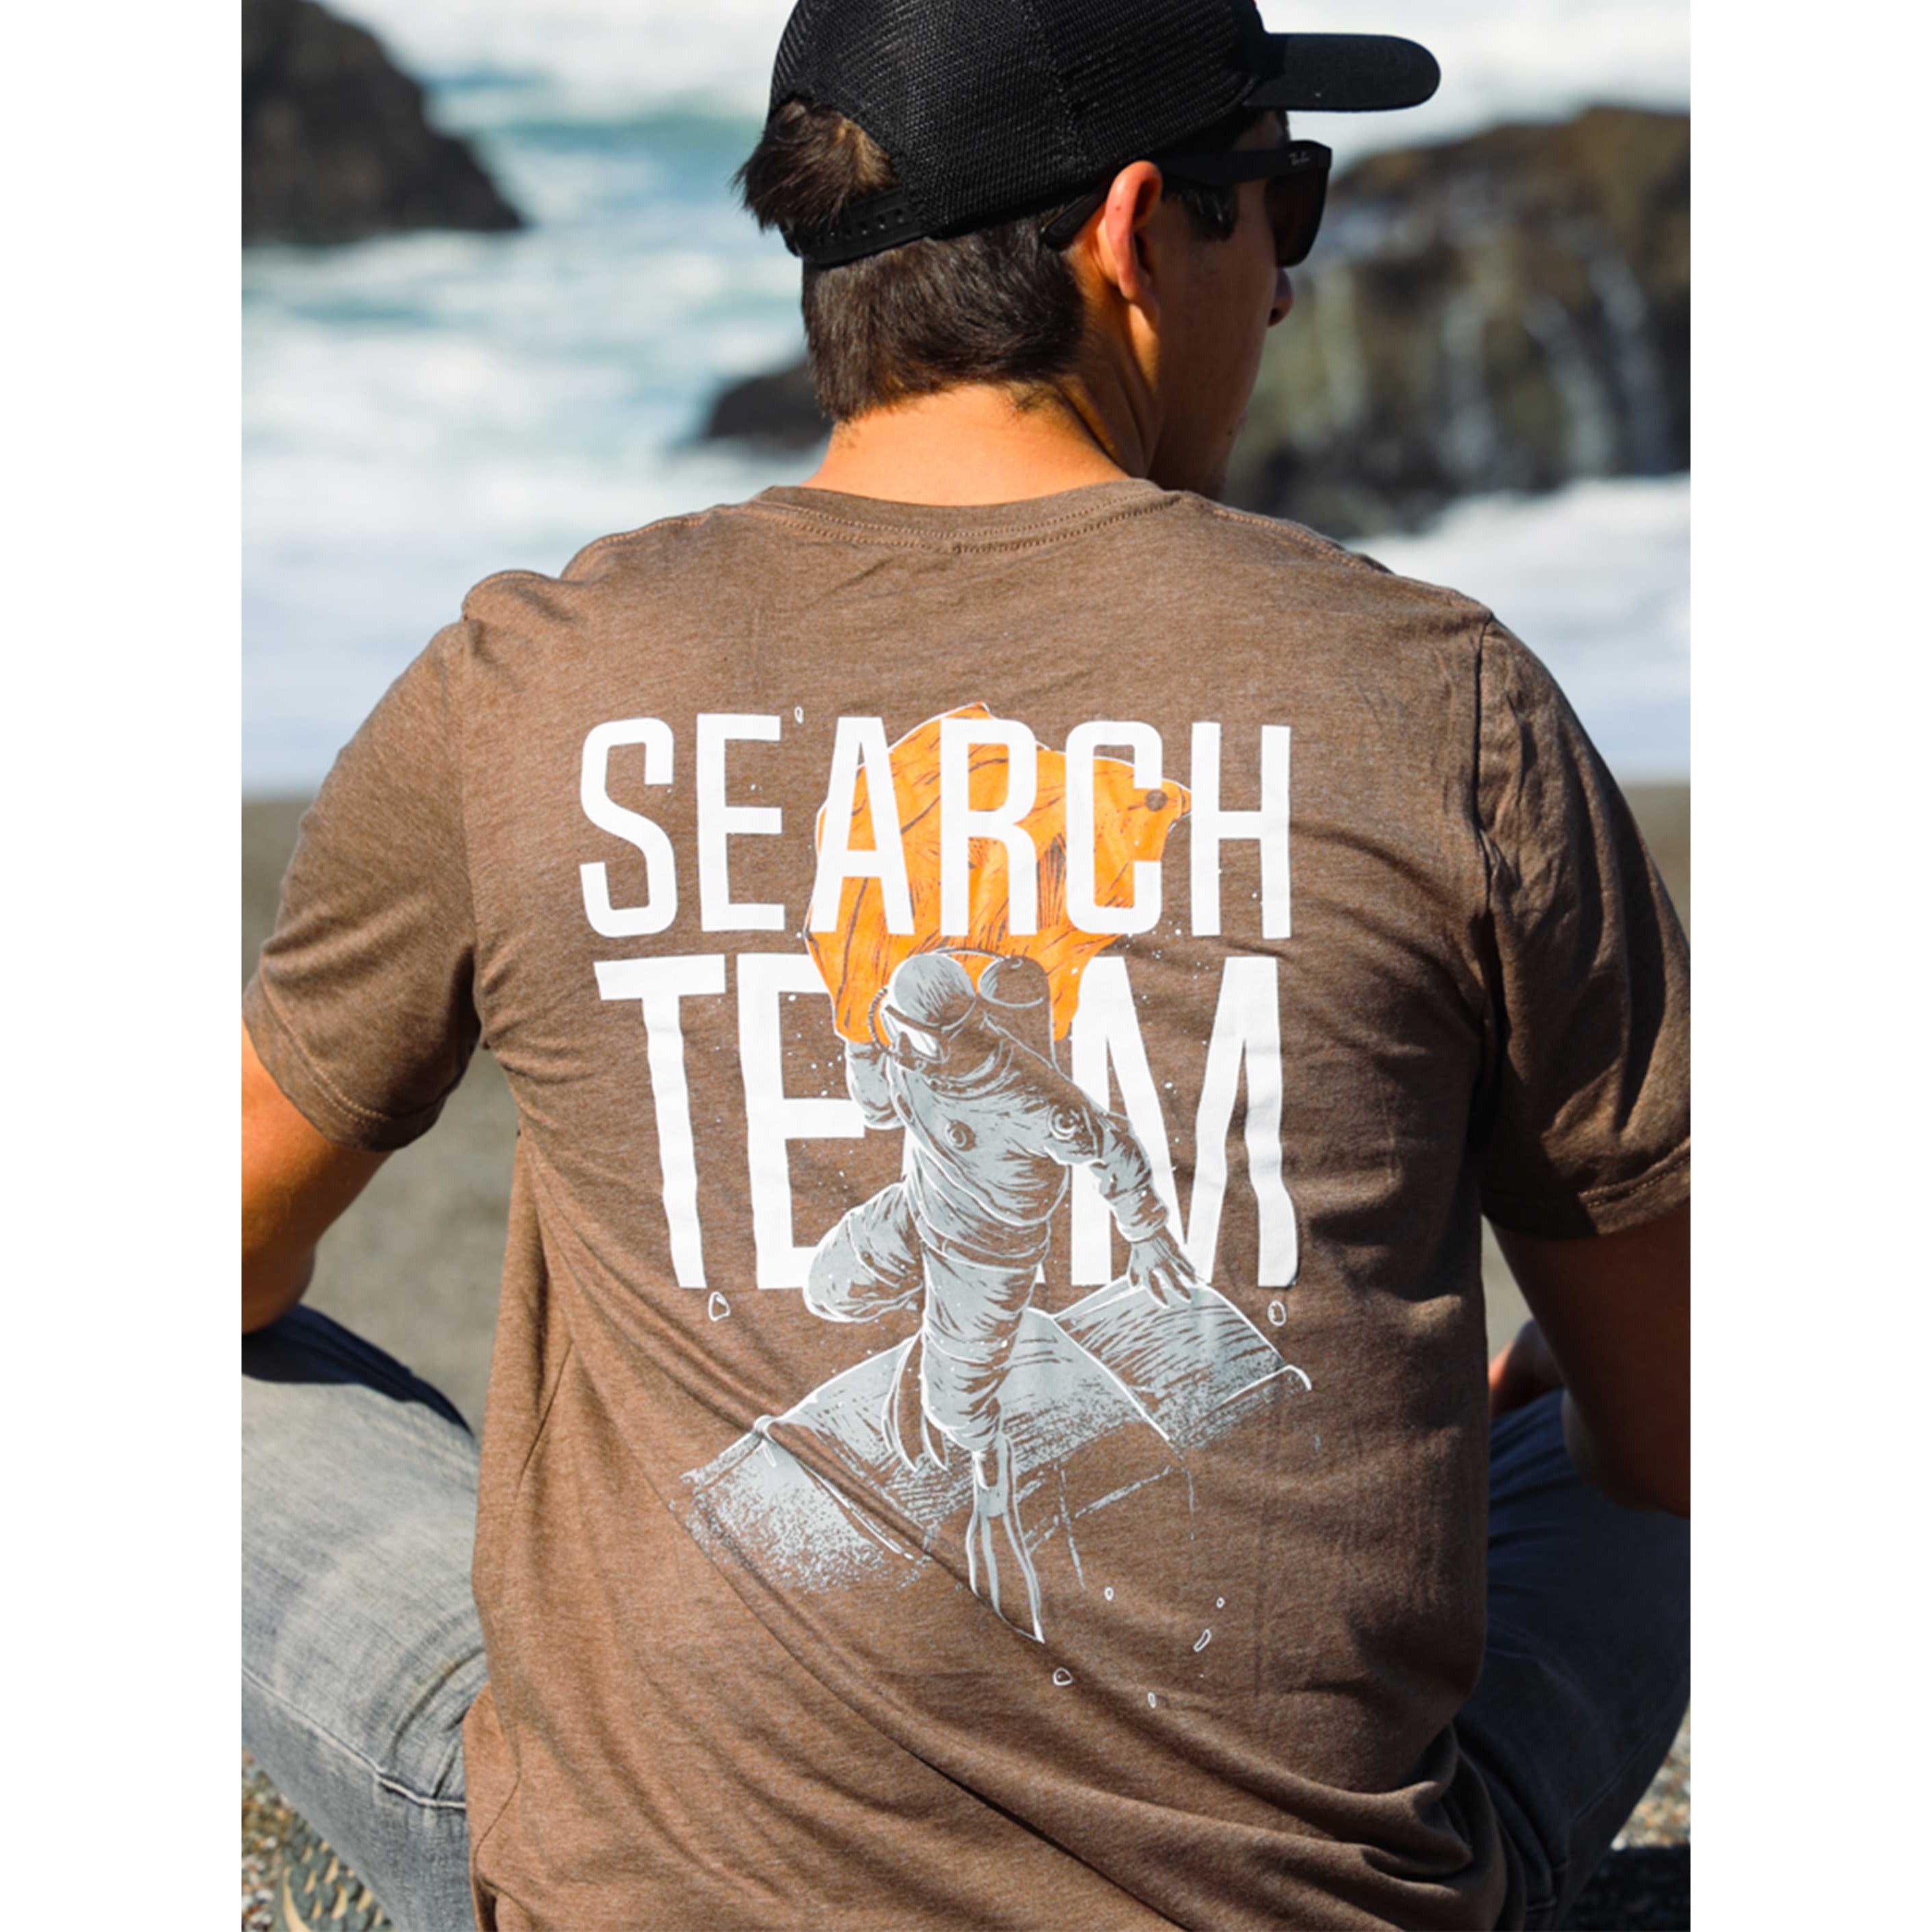 AWP SEARCH TEAM Premium Crew T-Shirt w/ DIVER and LIFT BAG on Back